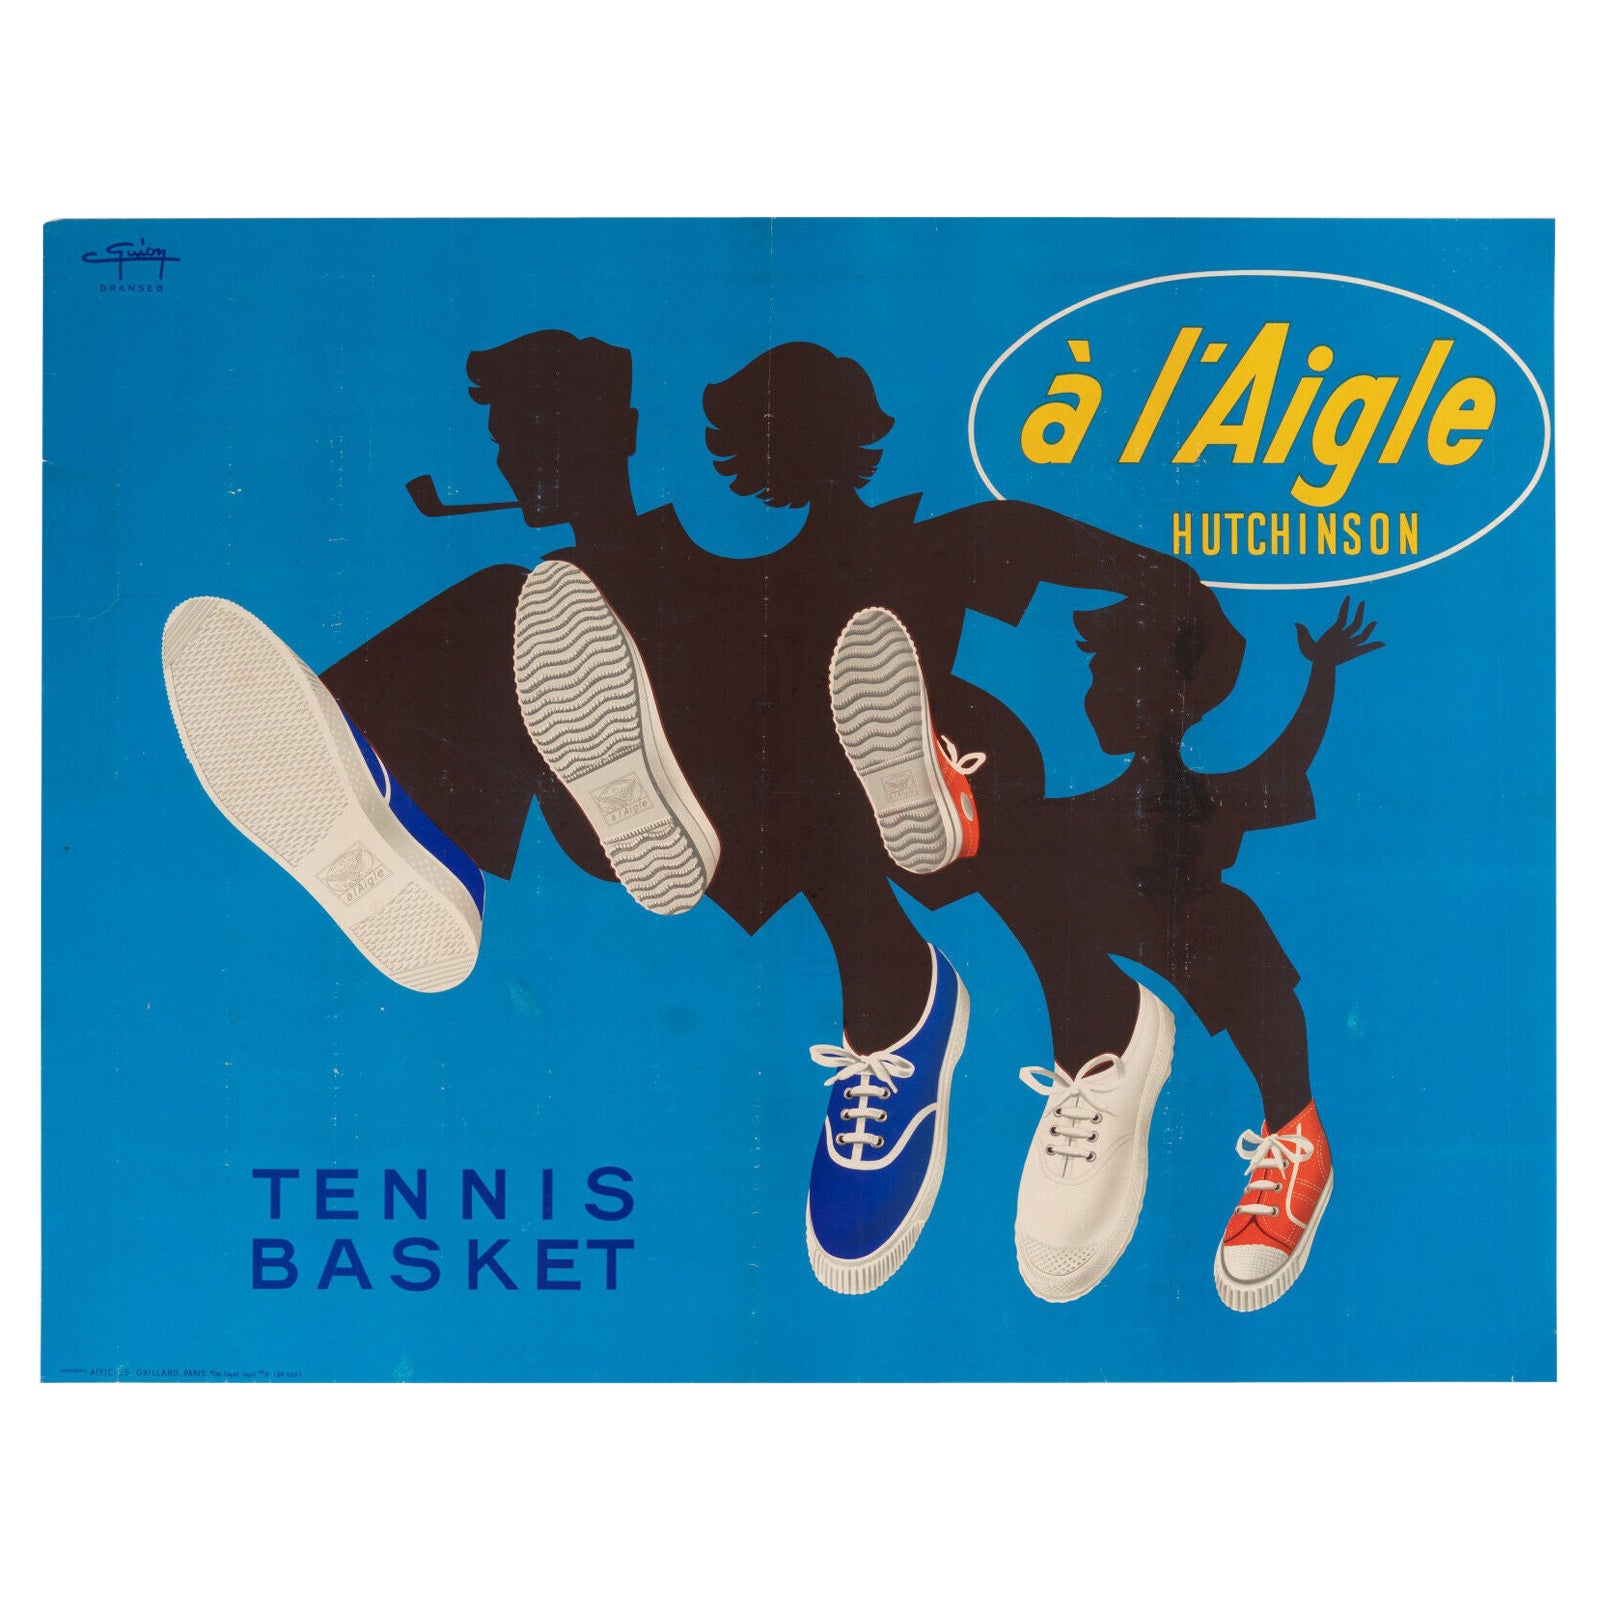 Original Vintage Poster, Hutchinson, Tennis, Basketball, Sneakers, 1950 For Sale